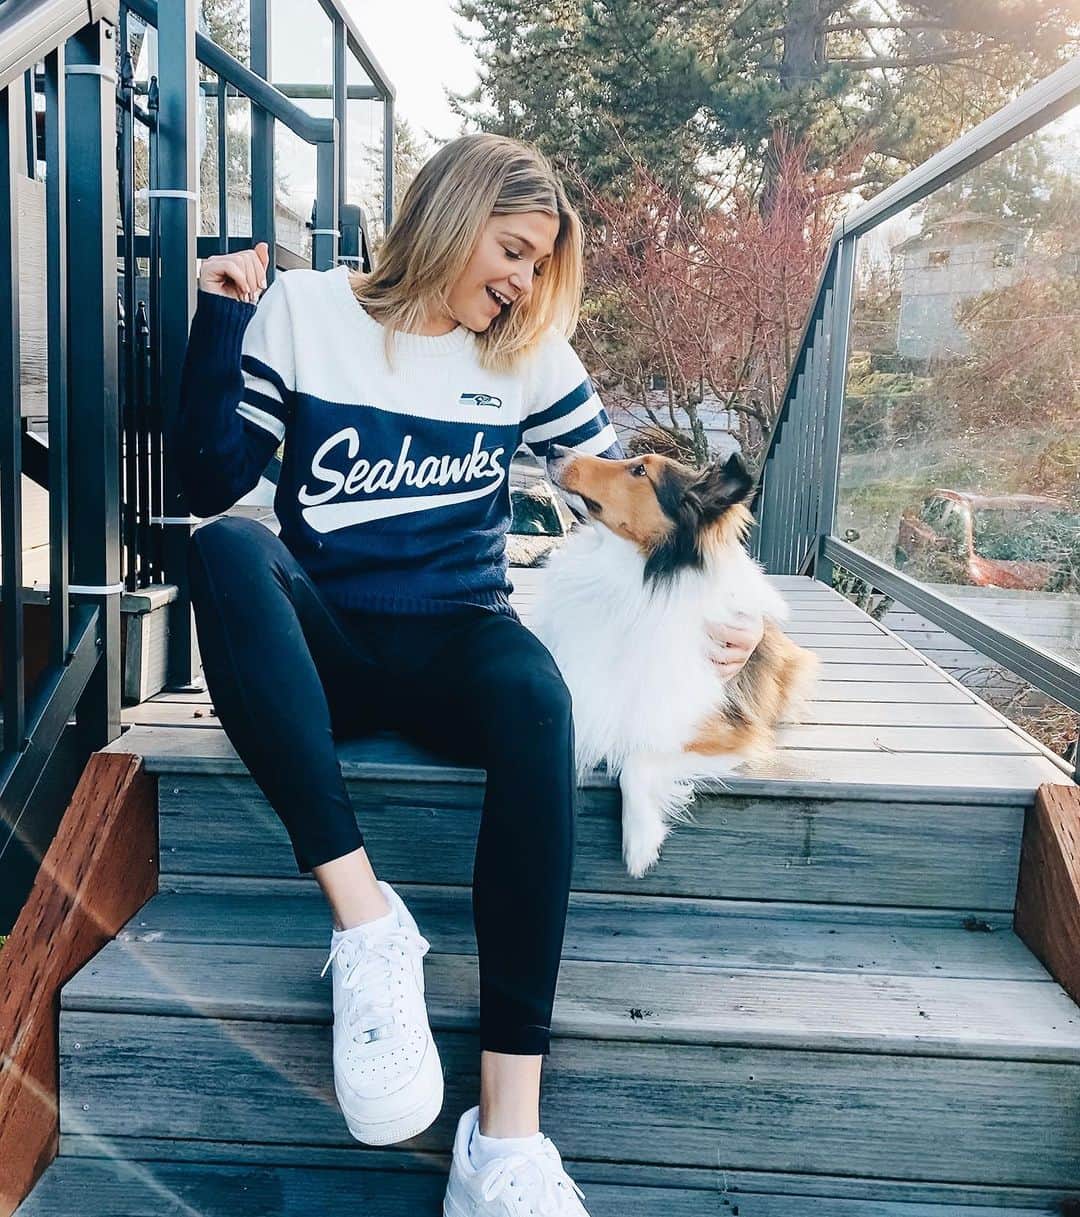 Monica Churchのインスタグラム：「With football season in full swing and lots of holiday family time coming up, I LOVE this @seahawks sweater from Touch By @Milano_Alyssa available at @fanatics😩🙏 There are tons of cute styles for every team across all leagues. This old school Christmas sweater style is my personal favorite! #Ad #TeamTouch」